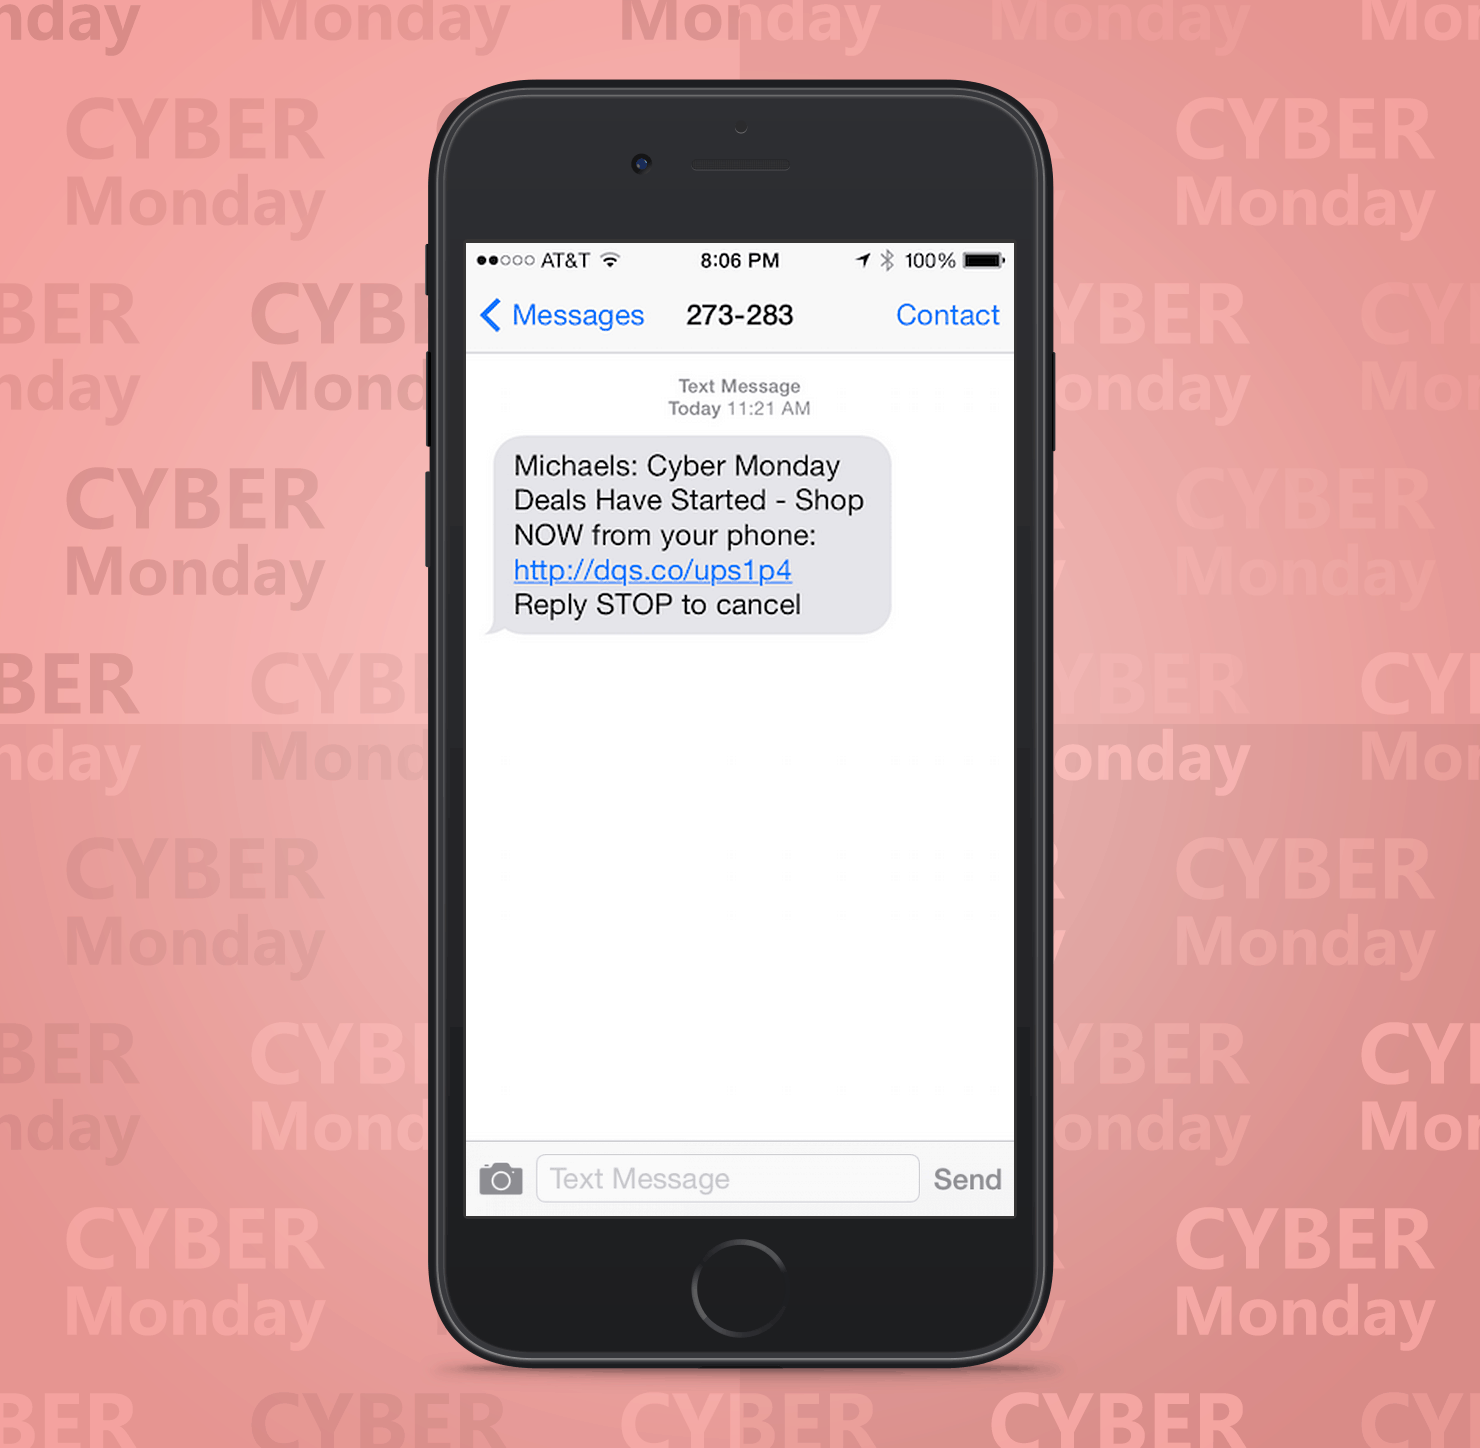 SMS Coupon Example Sent on Cyber Monday From Michaels Retail Stores to Customers